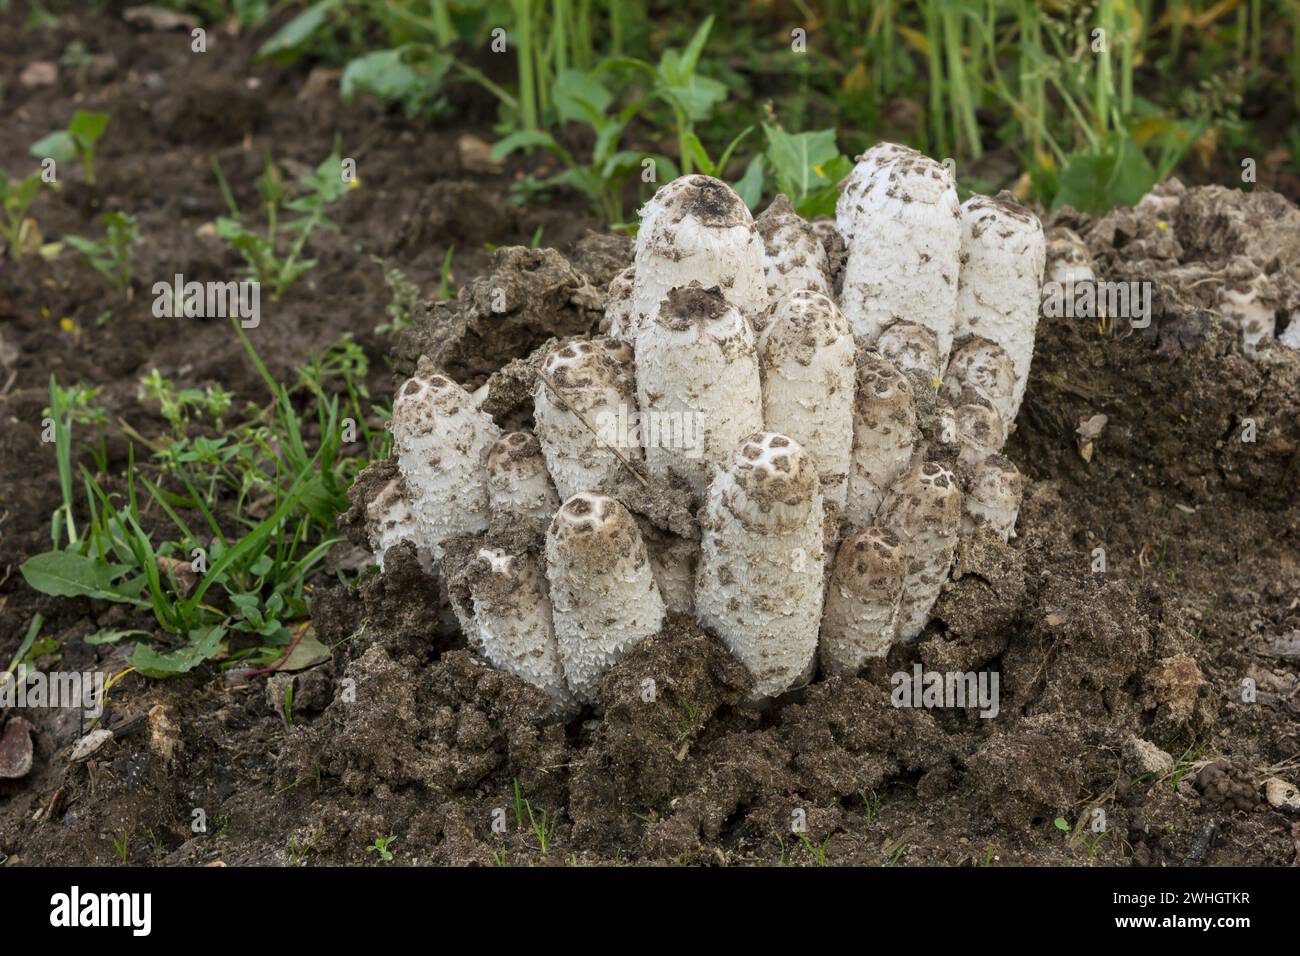 Crawled out of the soil coprinus comatus mushrooms growing  in the garden Stock Photo